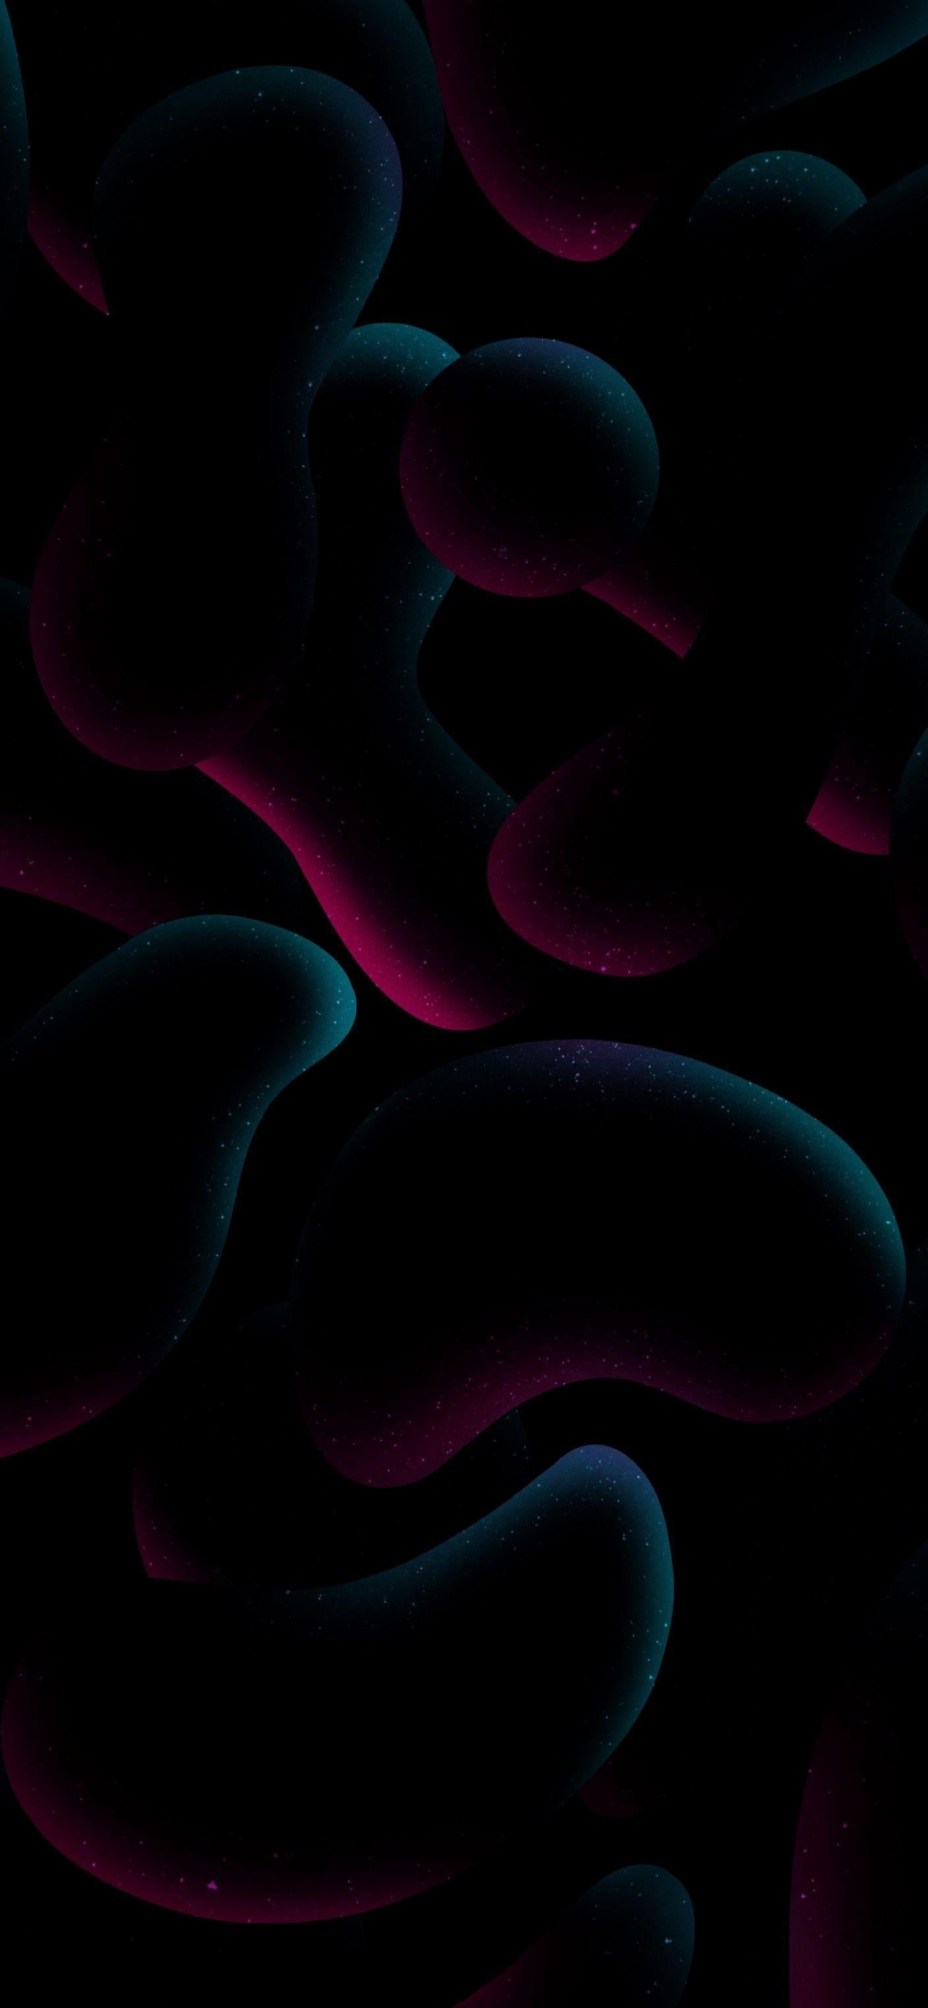 Neon Black Abstract Wallpaper For Tech